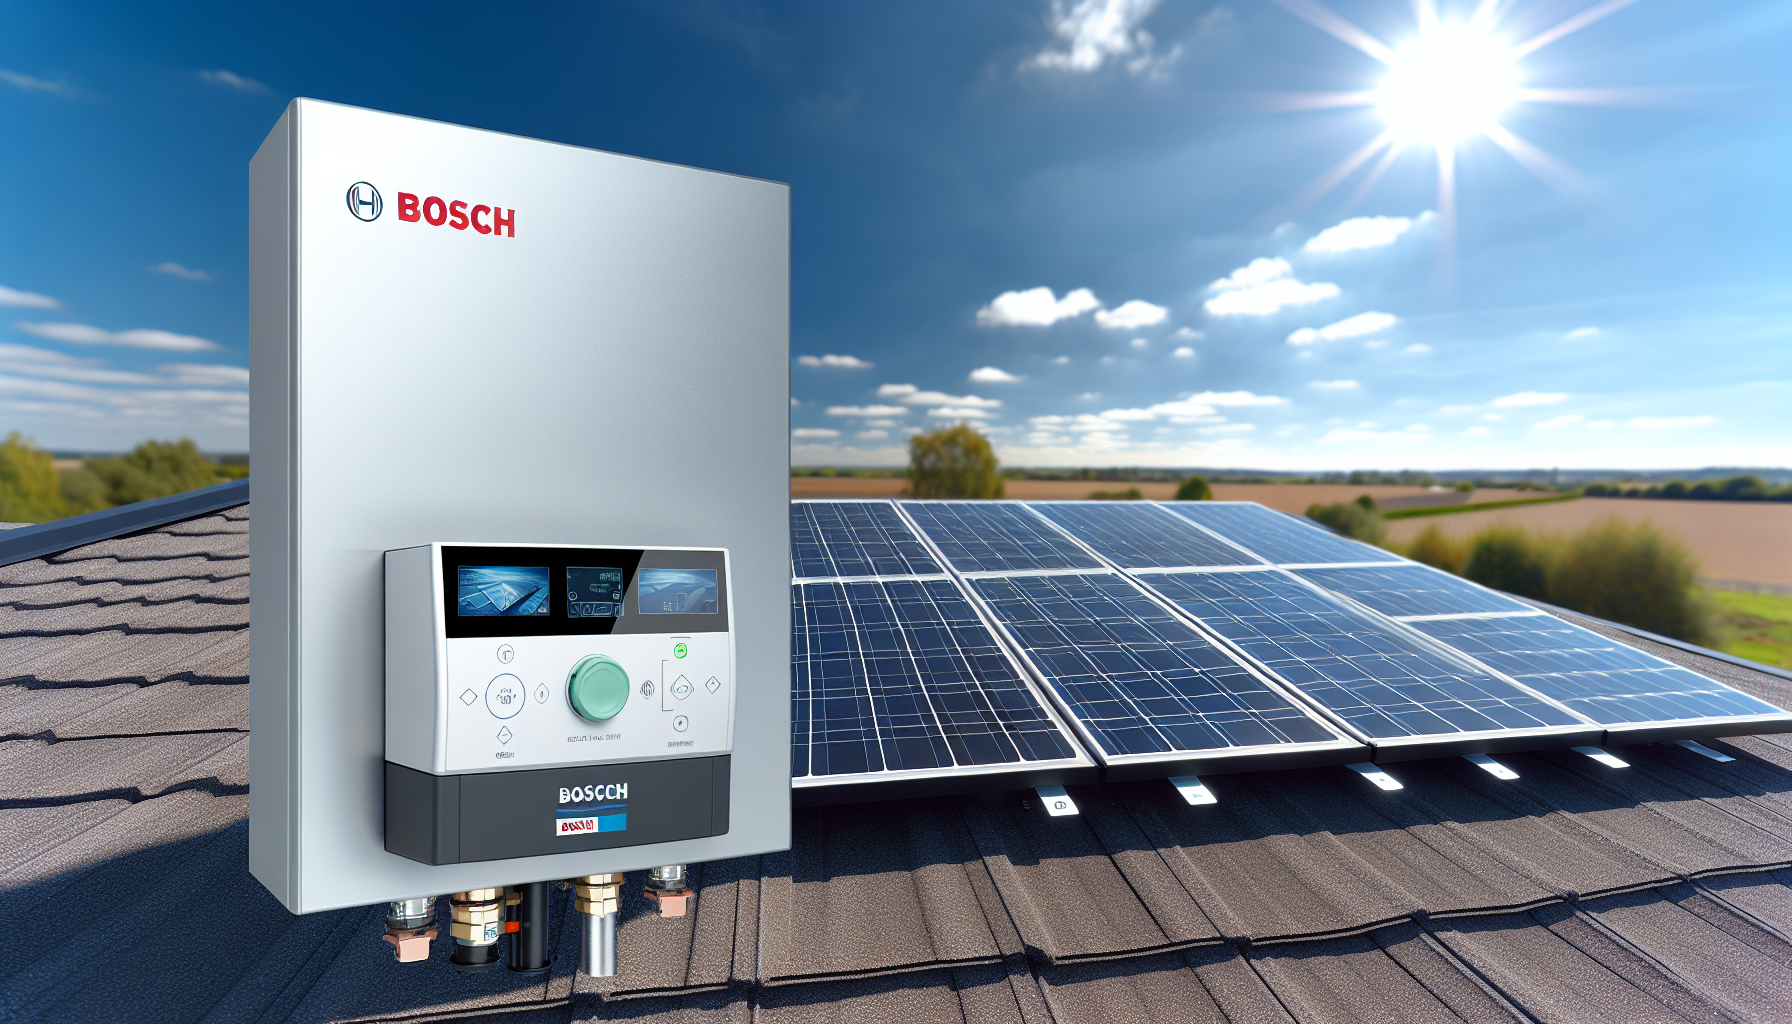 Bosch solar hot water system with smart controls